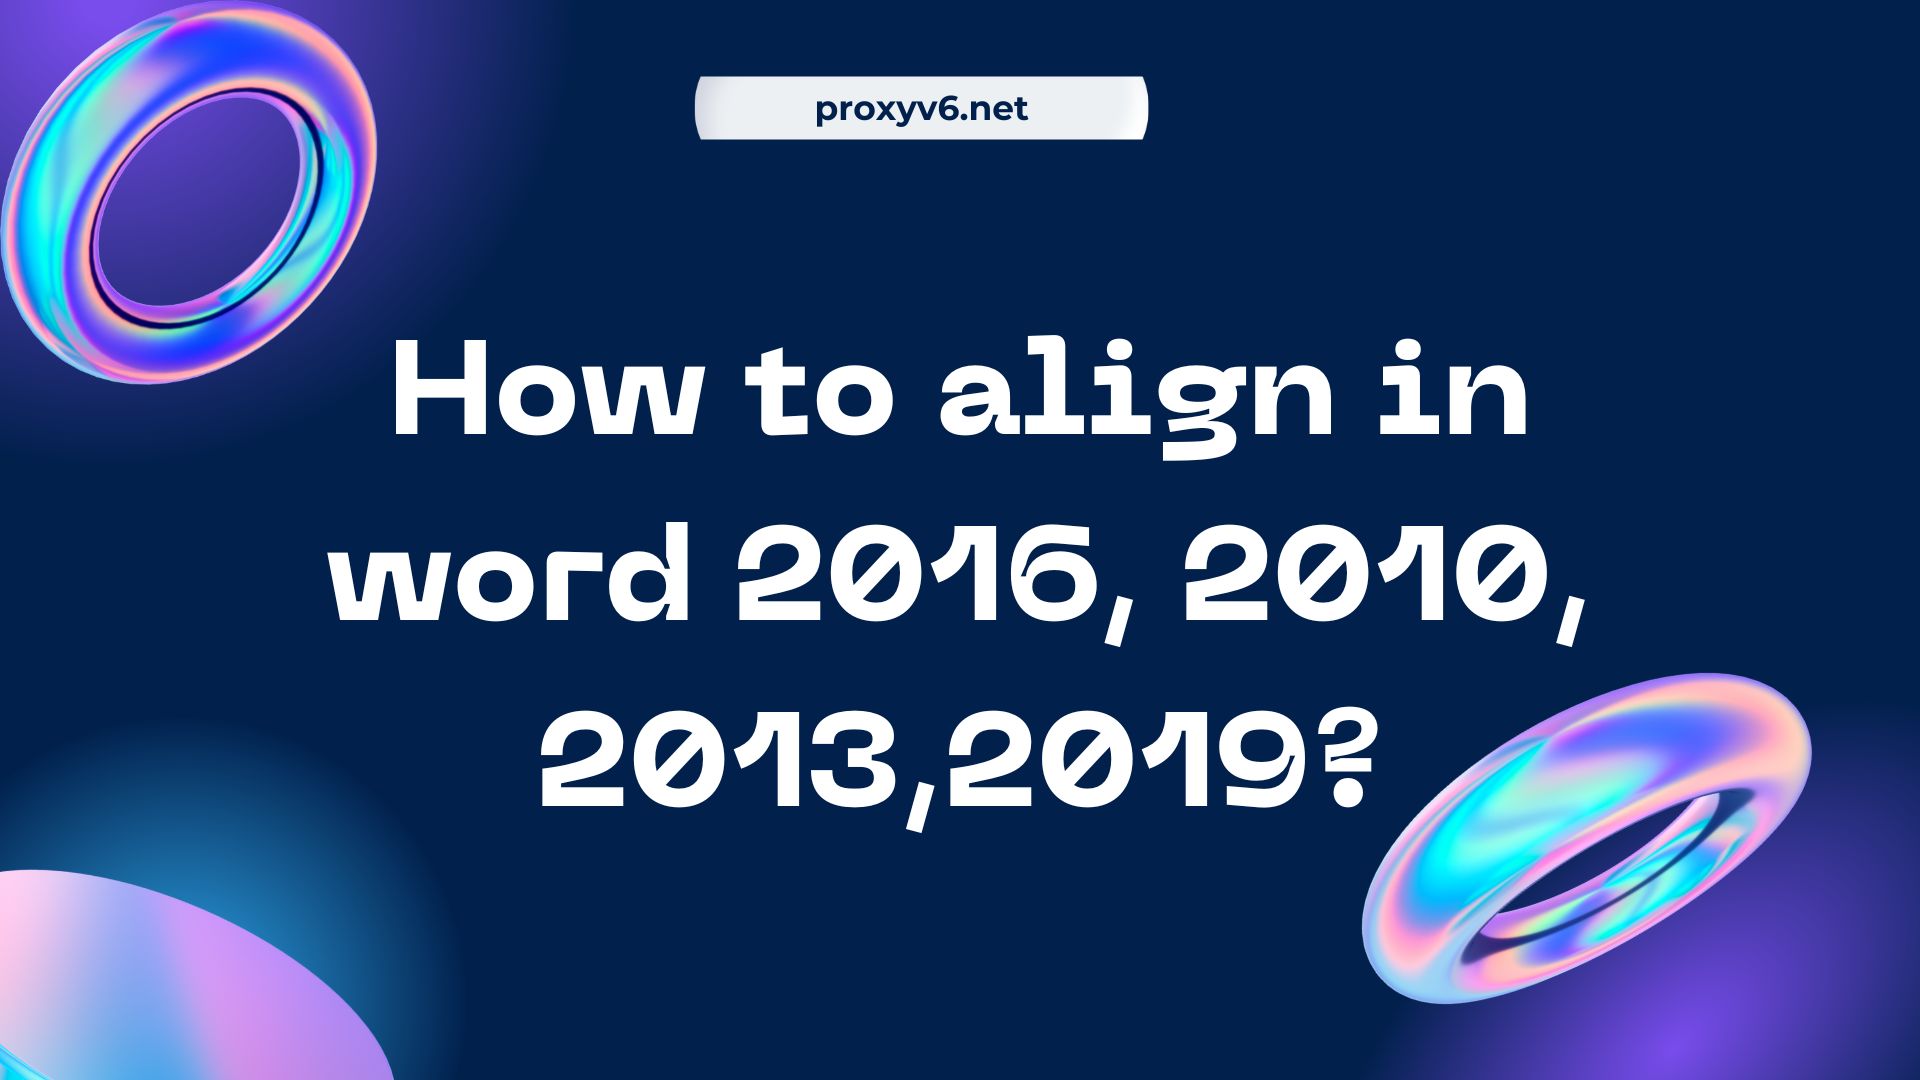 How to align in word 2016, 2010, 2013, 2019?